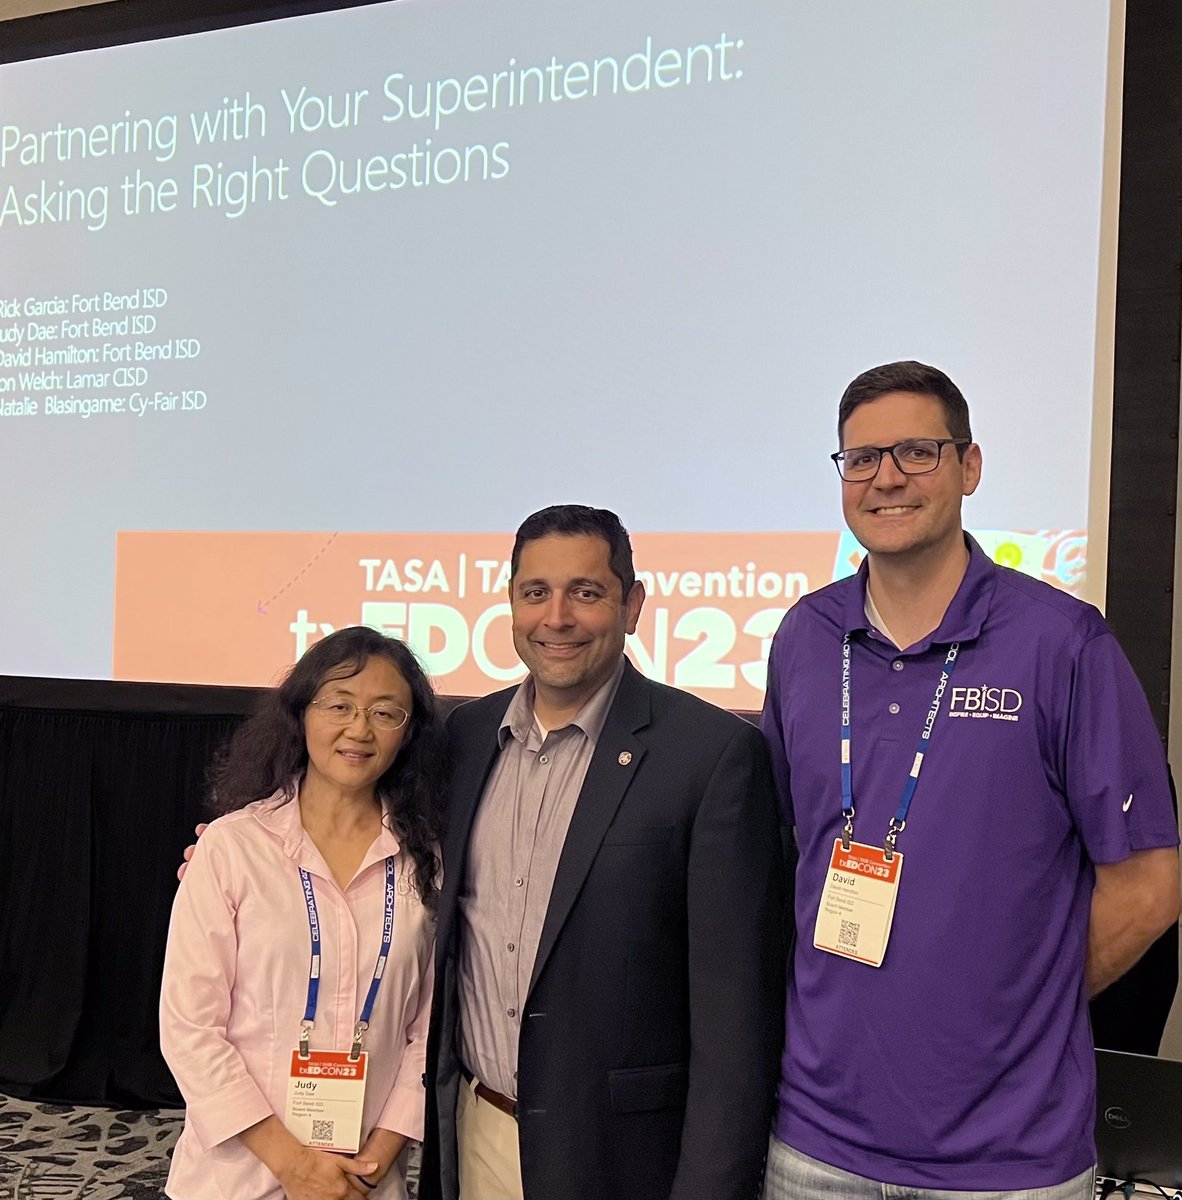 So proud of our Board of Trustees for presenting at TASA/TASB #txEDCON23! The session on partnering with your superintendent was standing room only & very insightful. Your leadership & dedication to all FBISD students is inspiring. FBISD cares! Proud Supt!